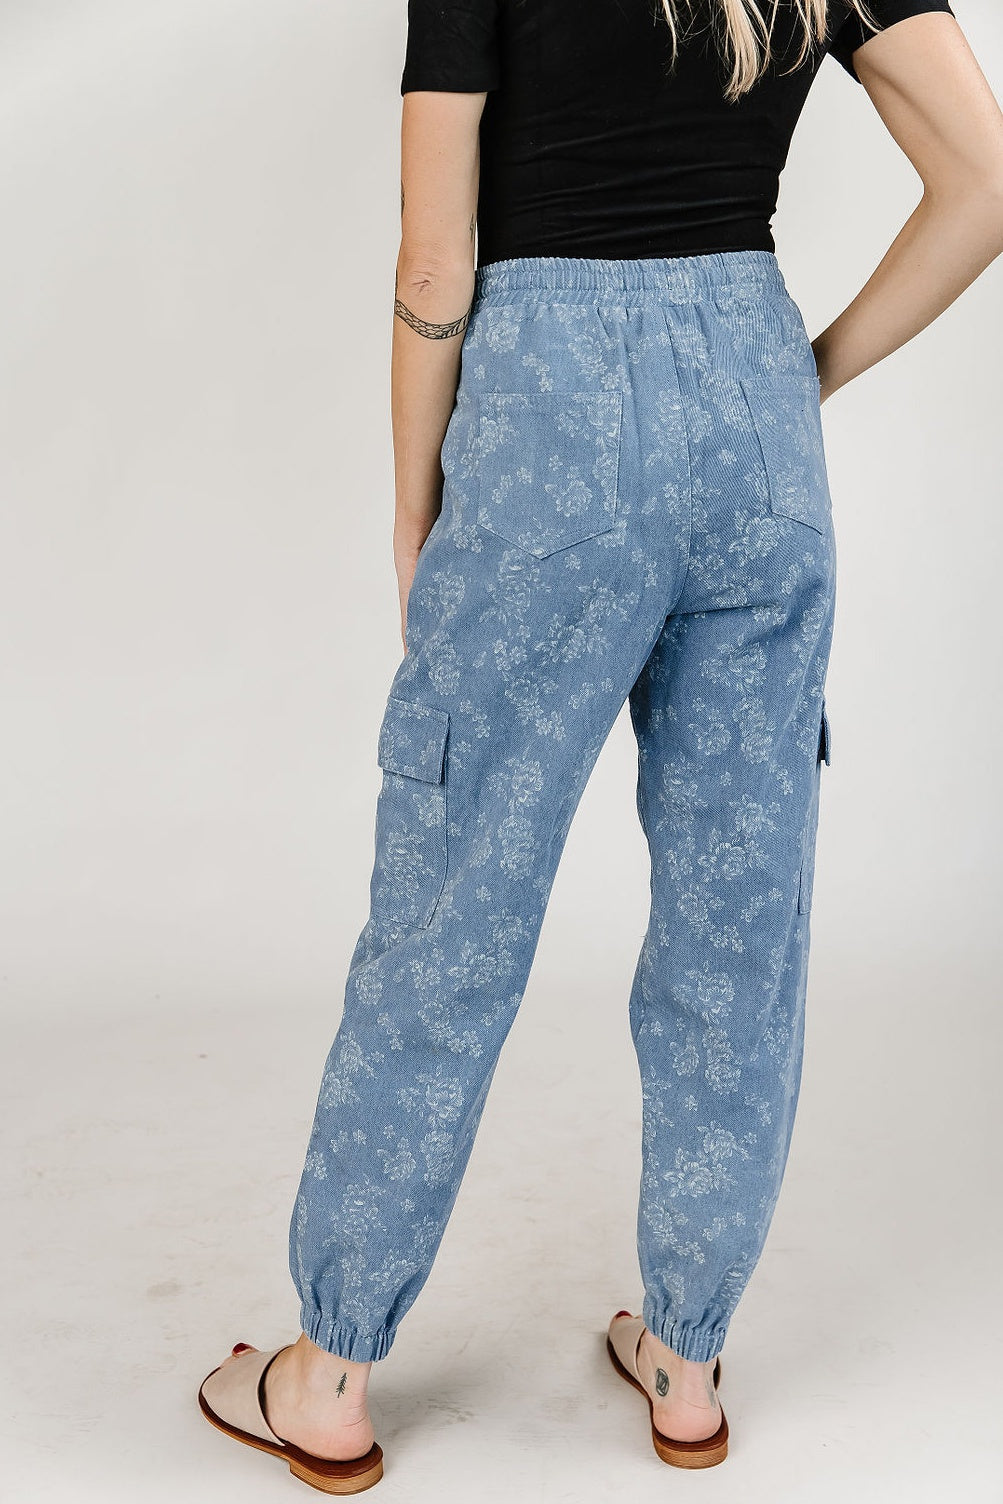 Ampersand Avenue - Floral Denim Joggers *Small Only*